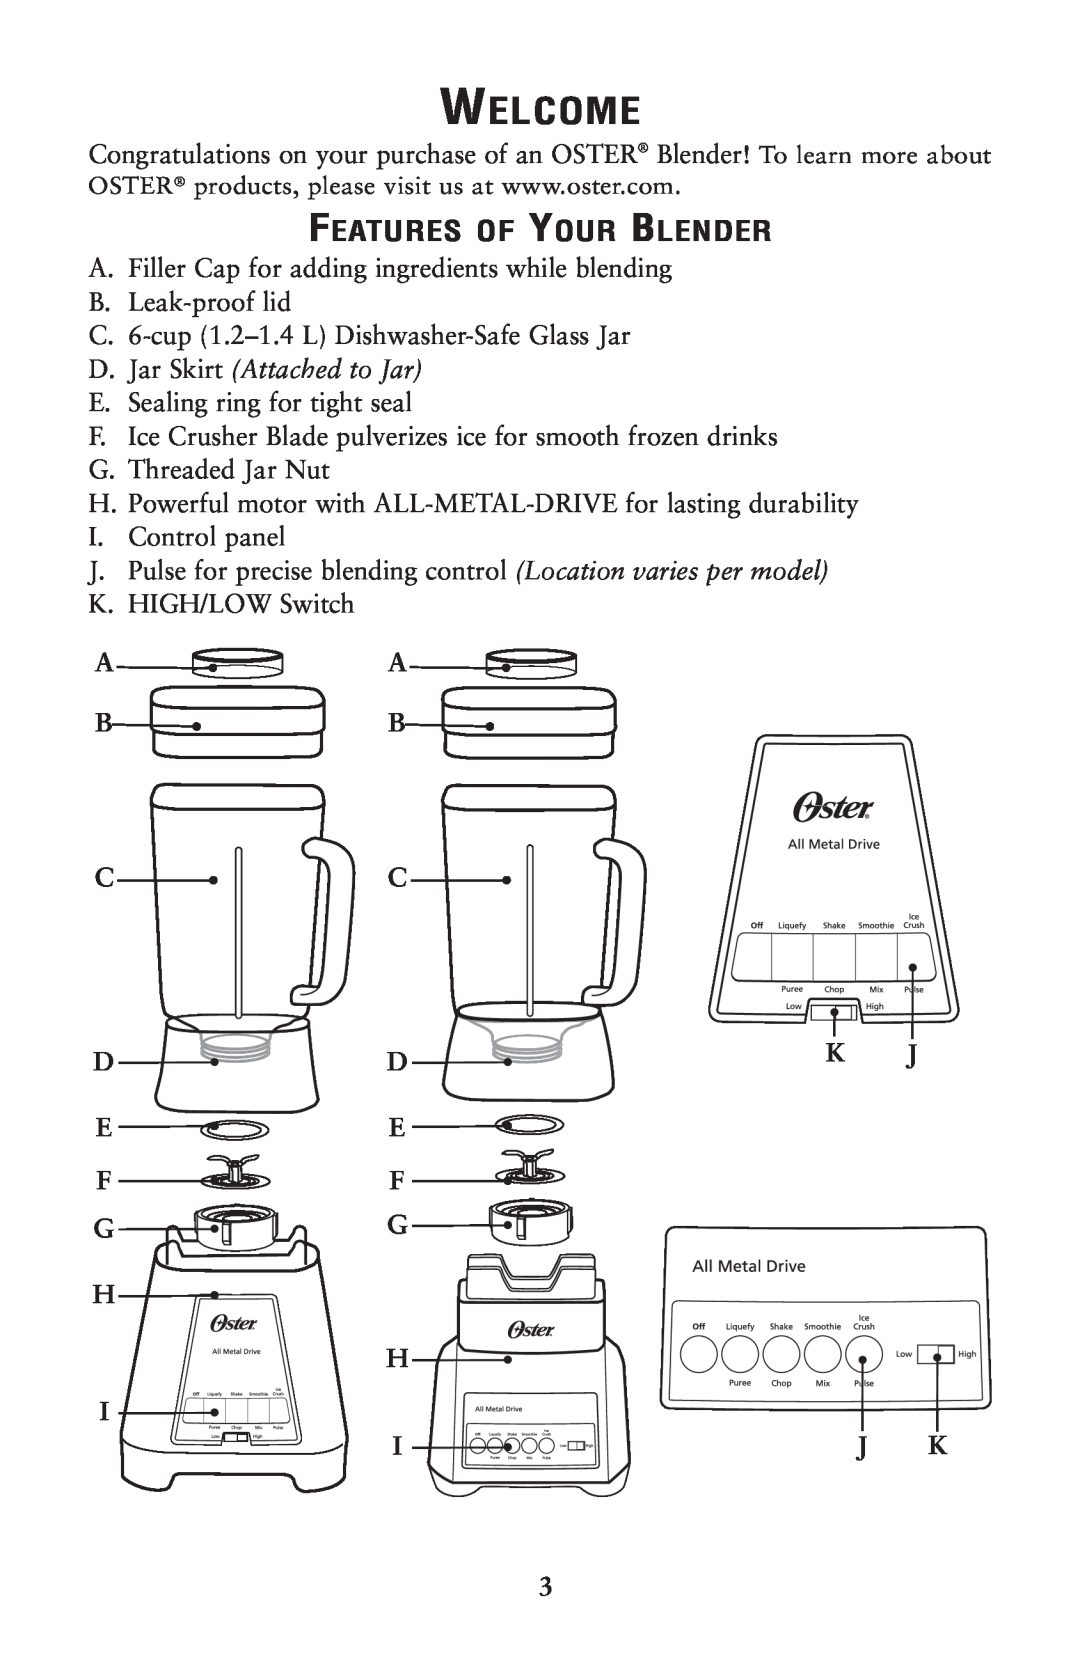 Oster Designer Series Push Button Blenders, 133086 Welcome, D. Jar Skirt Attached to Jar, Features Of Your Blender 